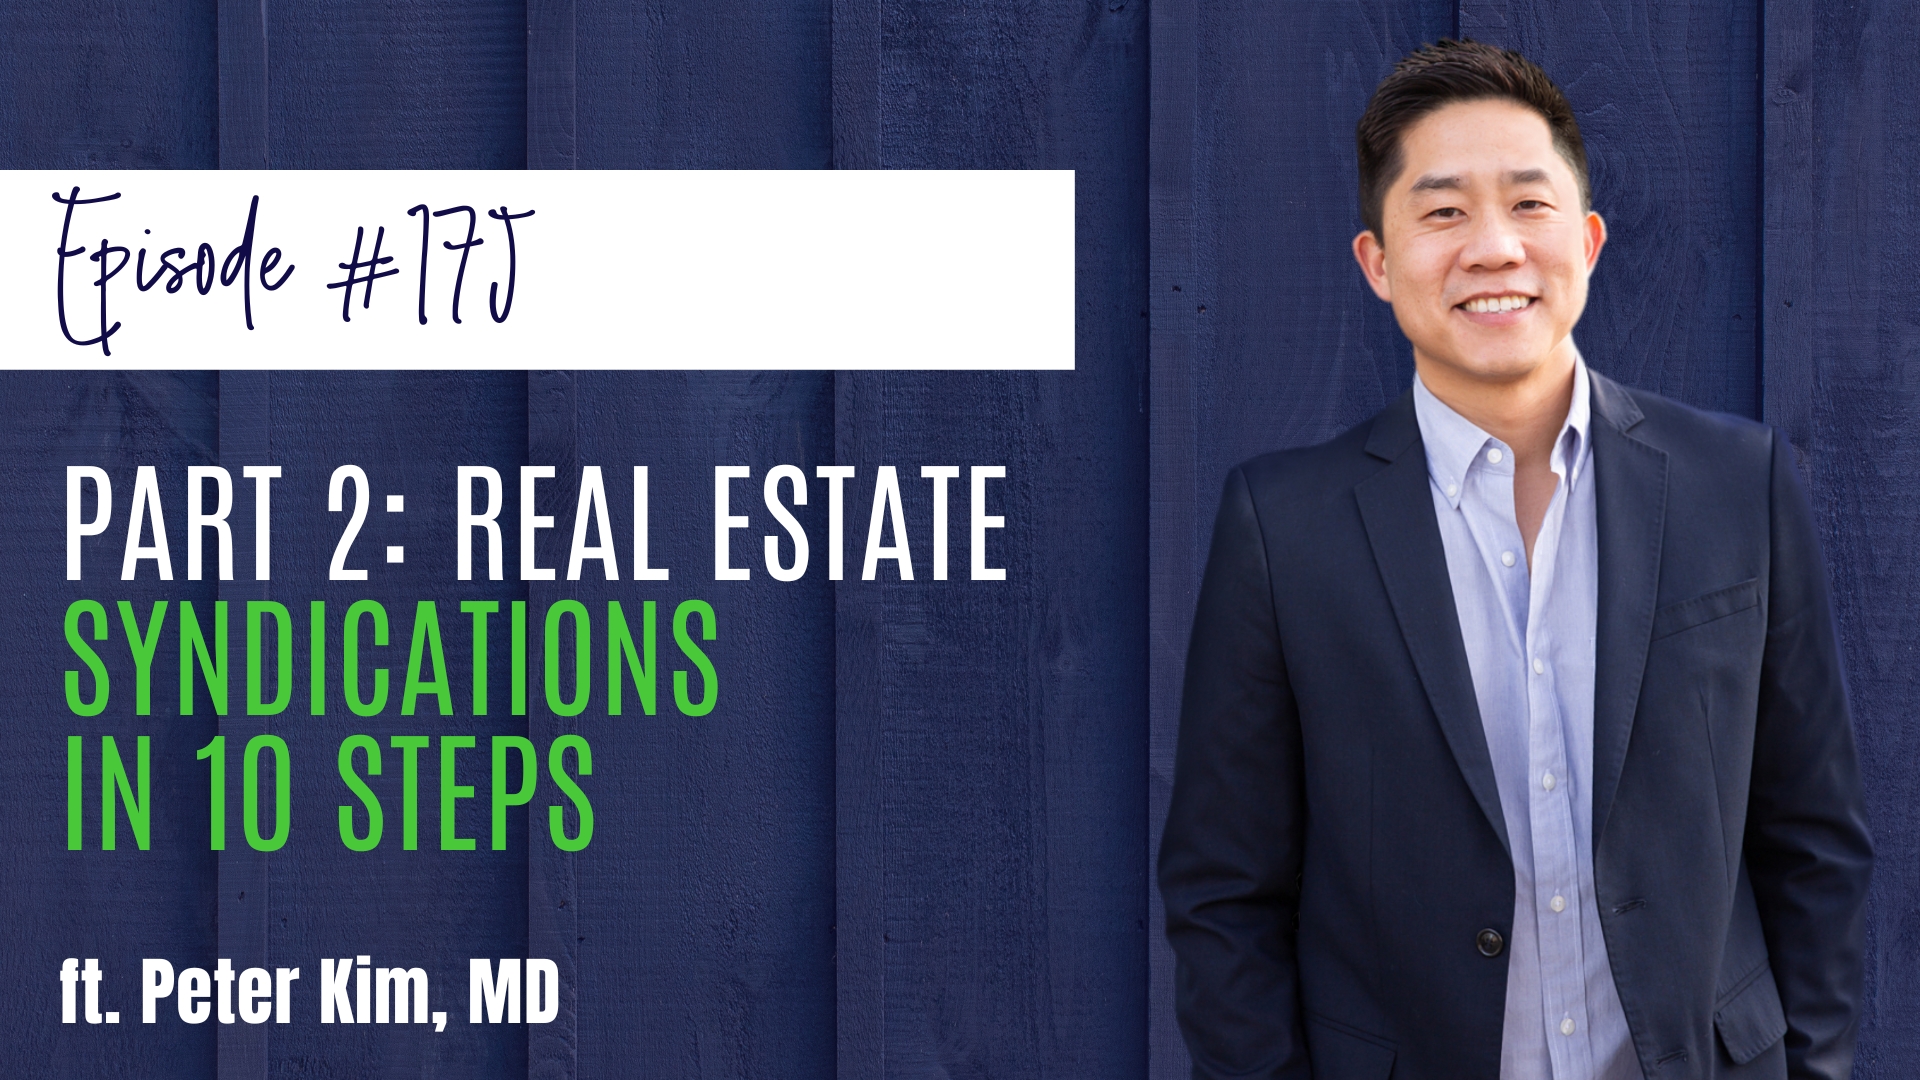 Part 2 Real Estate Syndications in 10 Steps